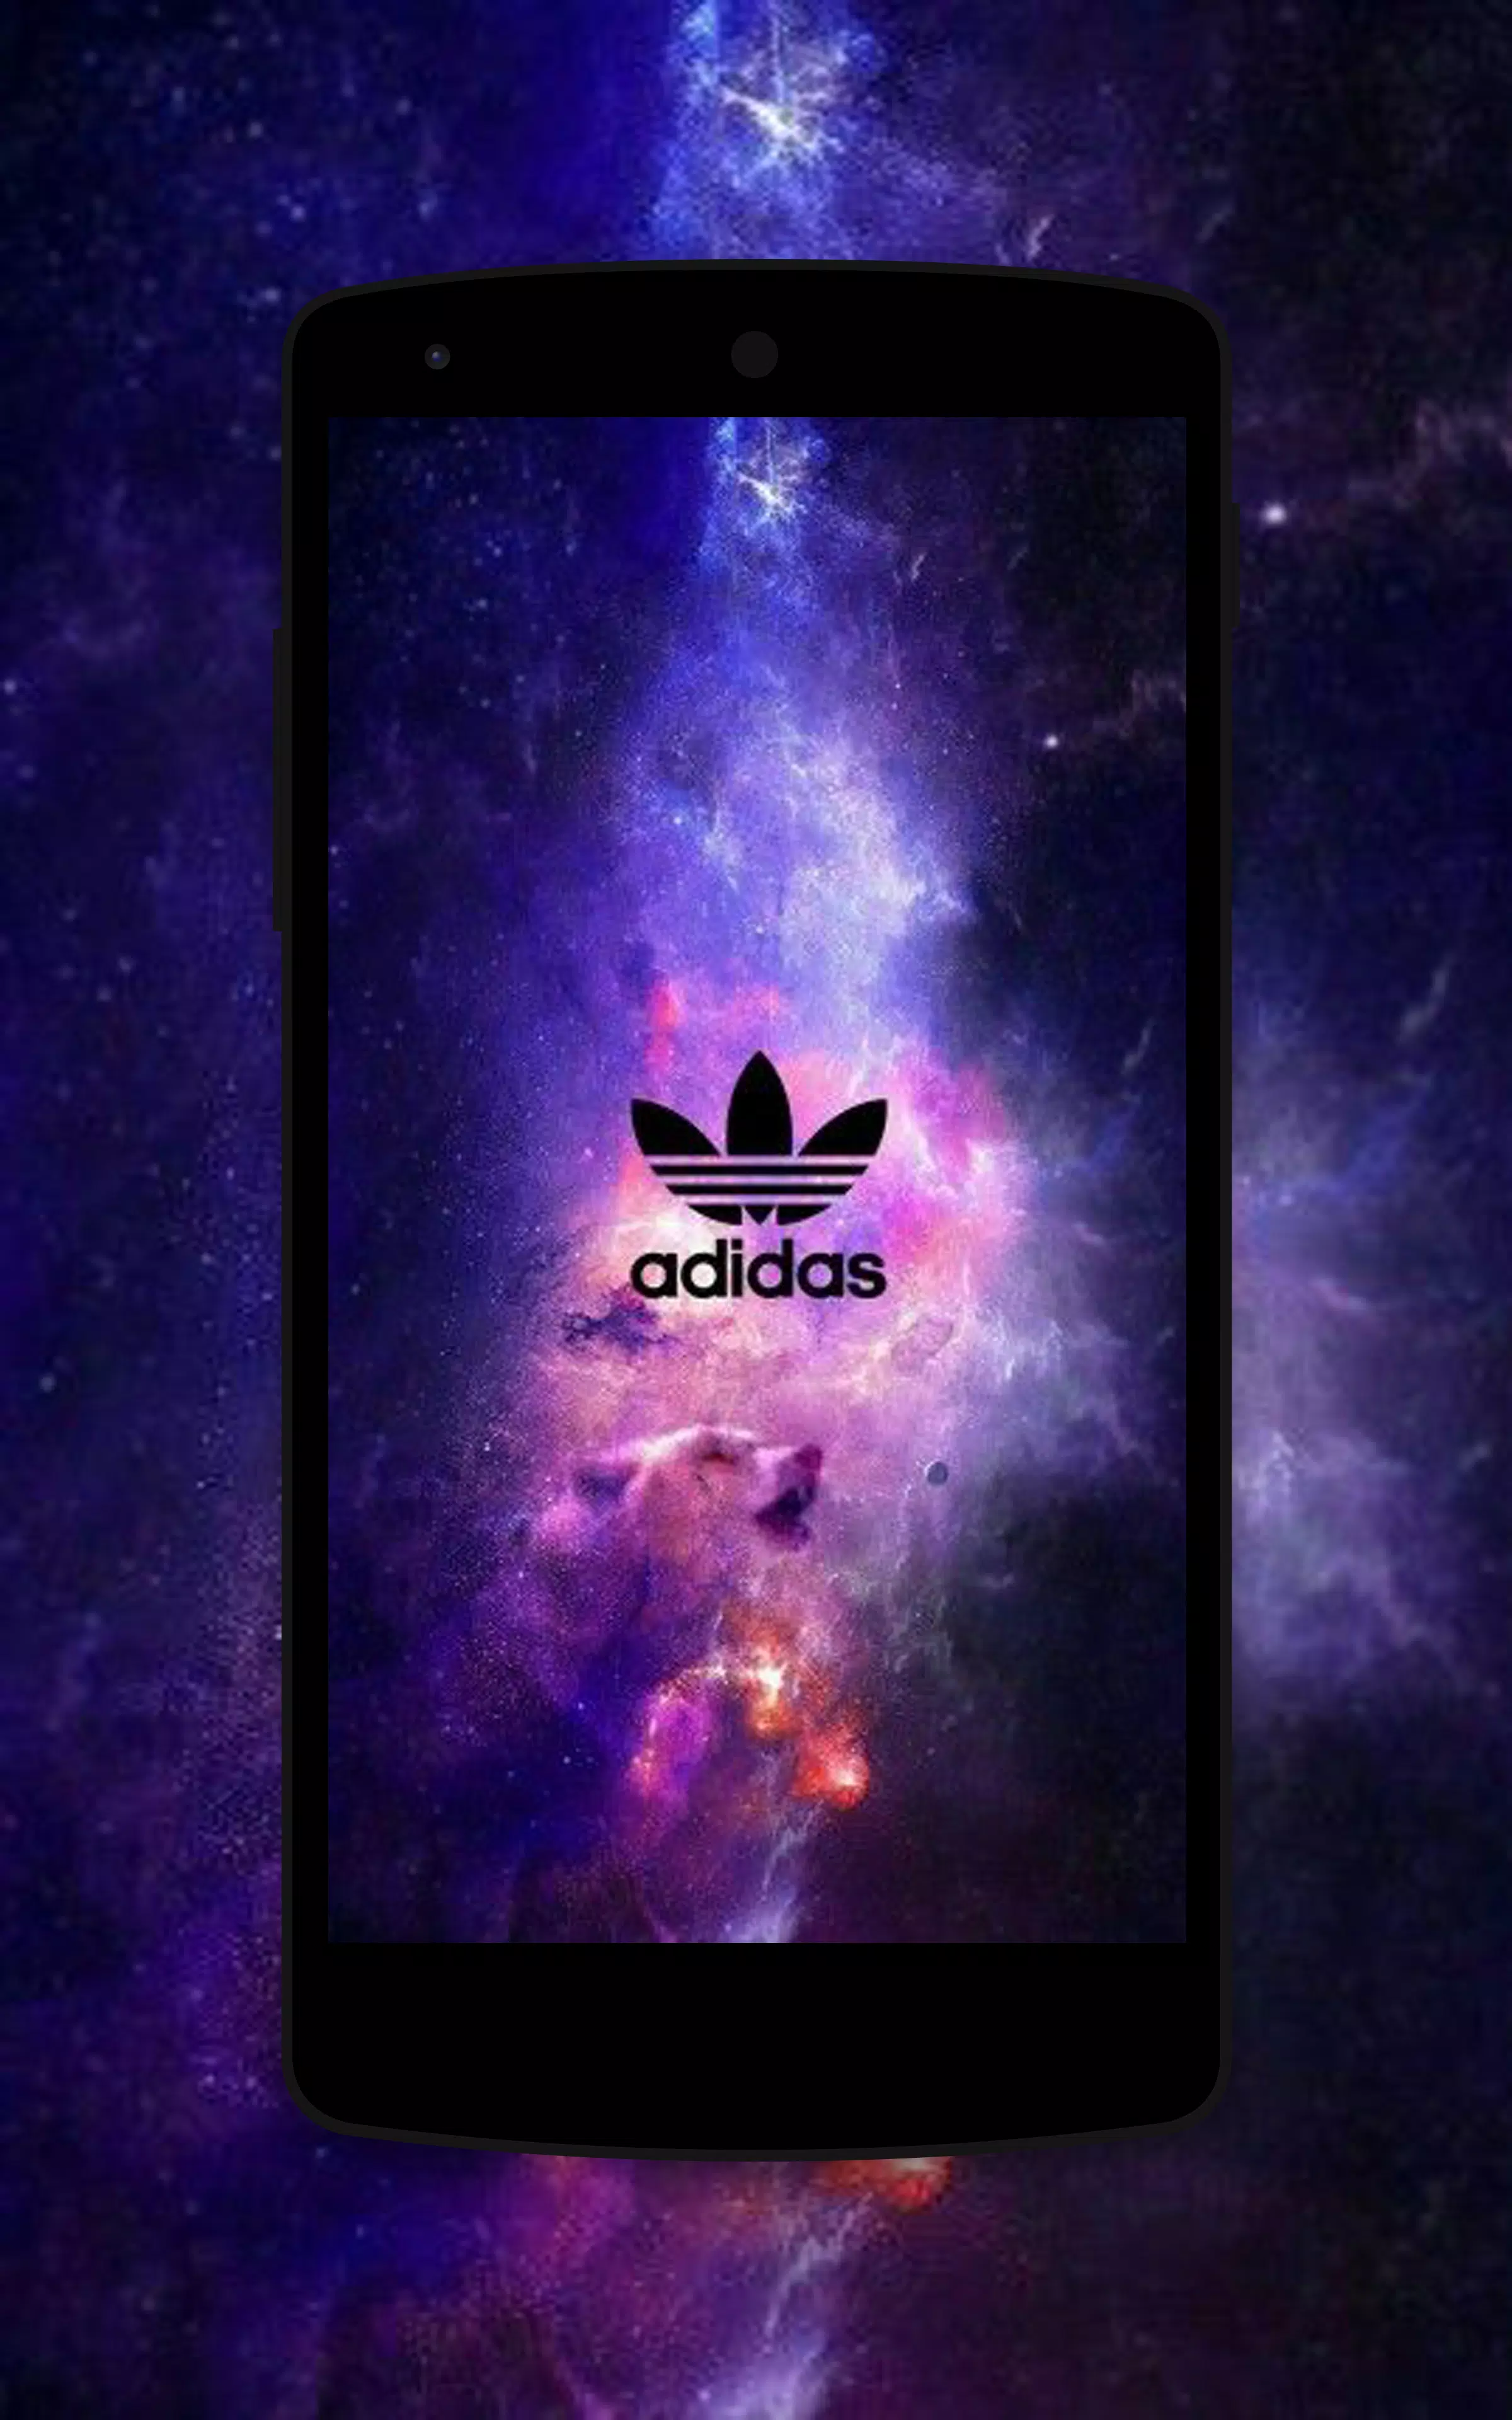 Hypebeast Wallpapers HD APK for Android Download